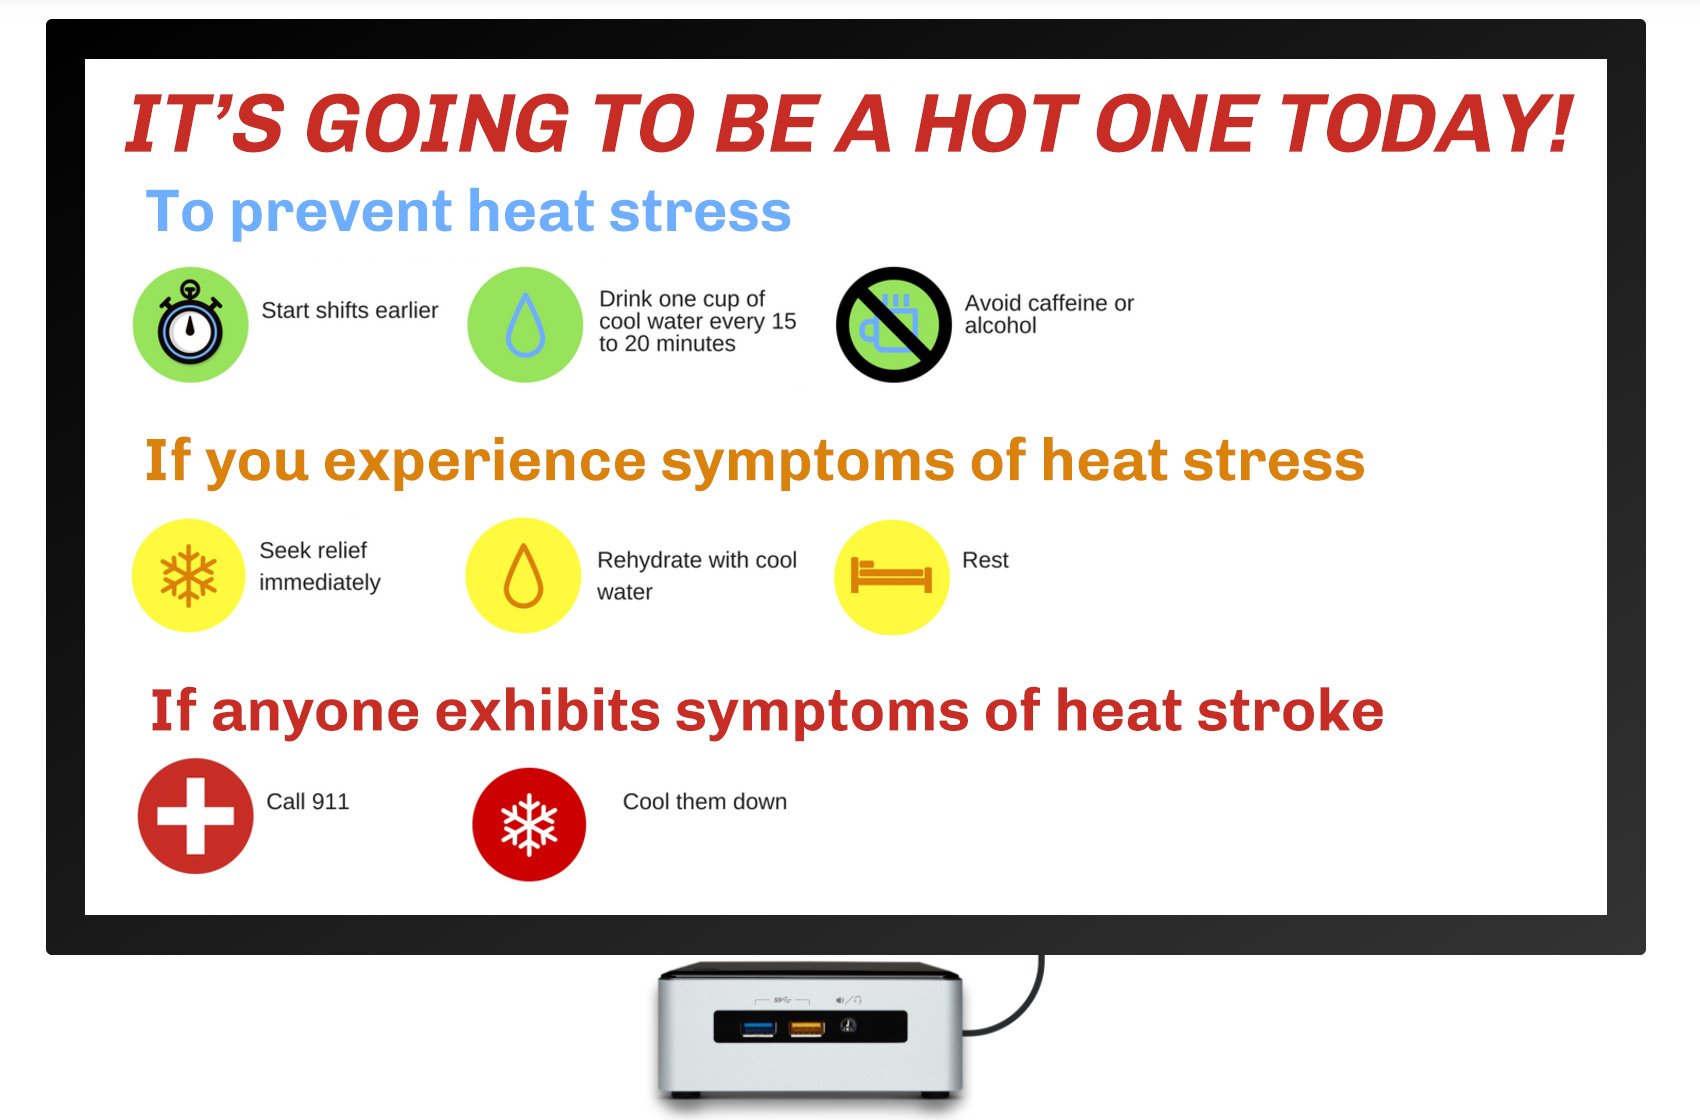 heat exhaustion prevention tips digital signage